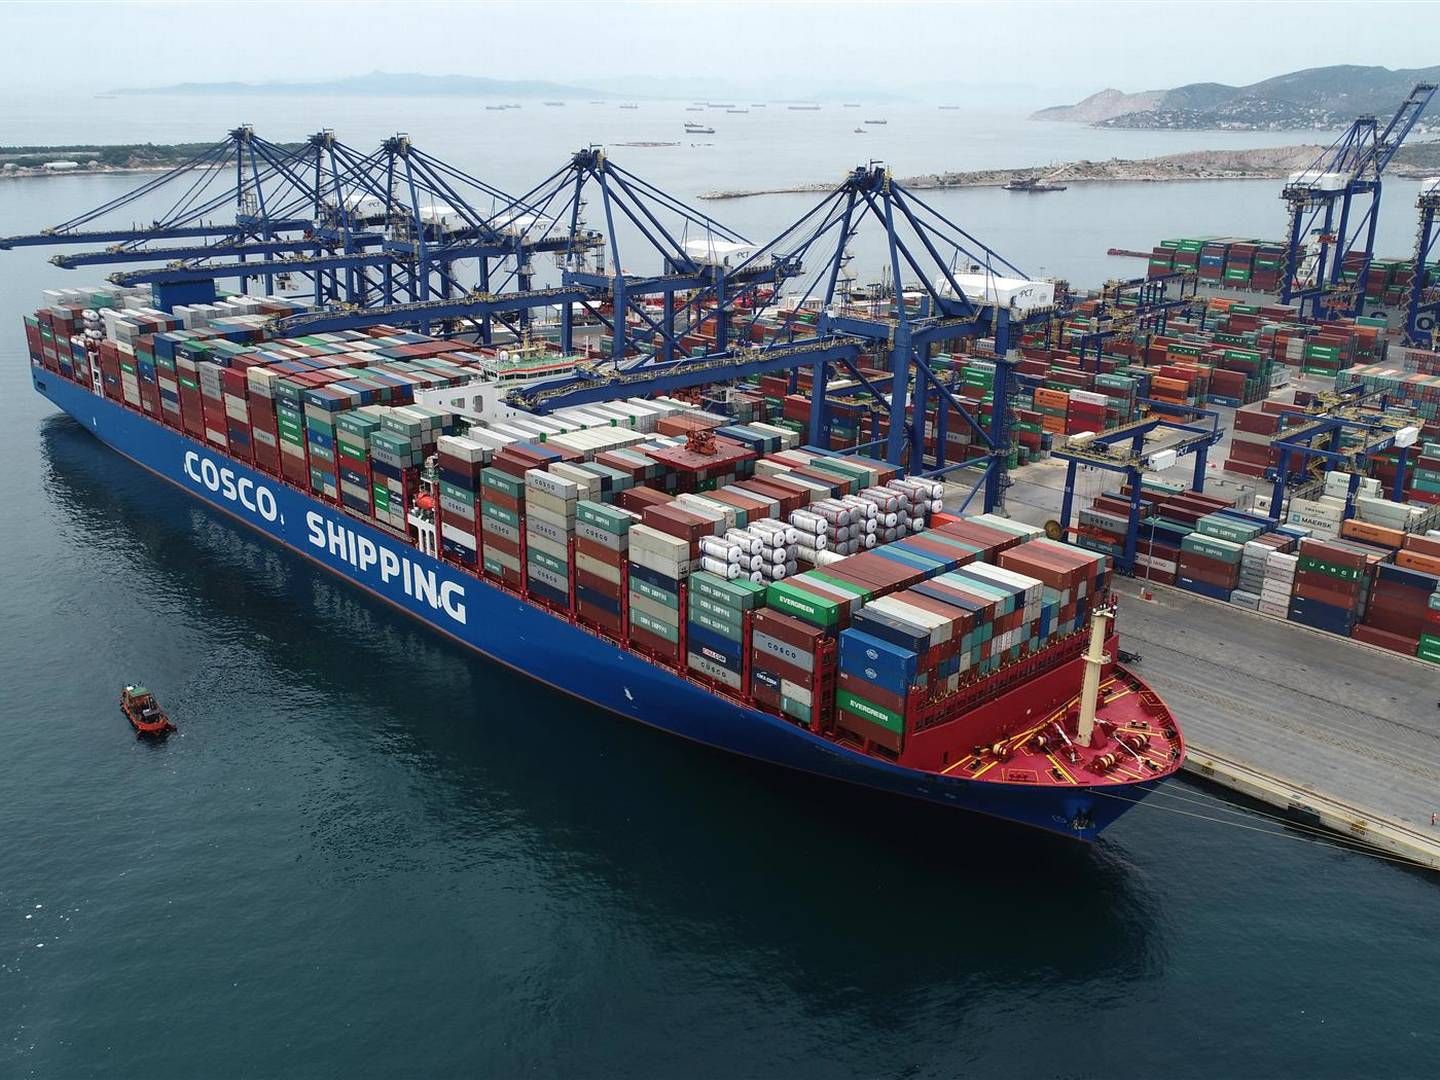 Cosco reveals figures on the carbon fee that customers will have to pay for transporting containers between Oceania and Europe. | Photo: Pr / Cosco Shipping